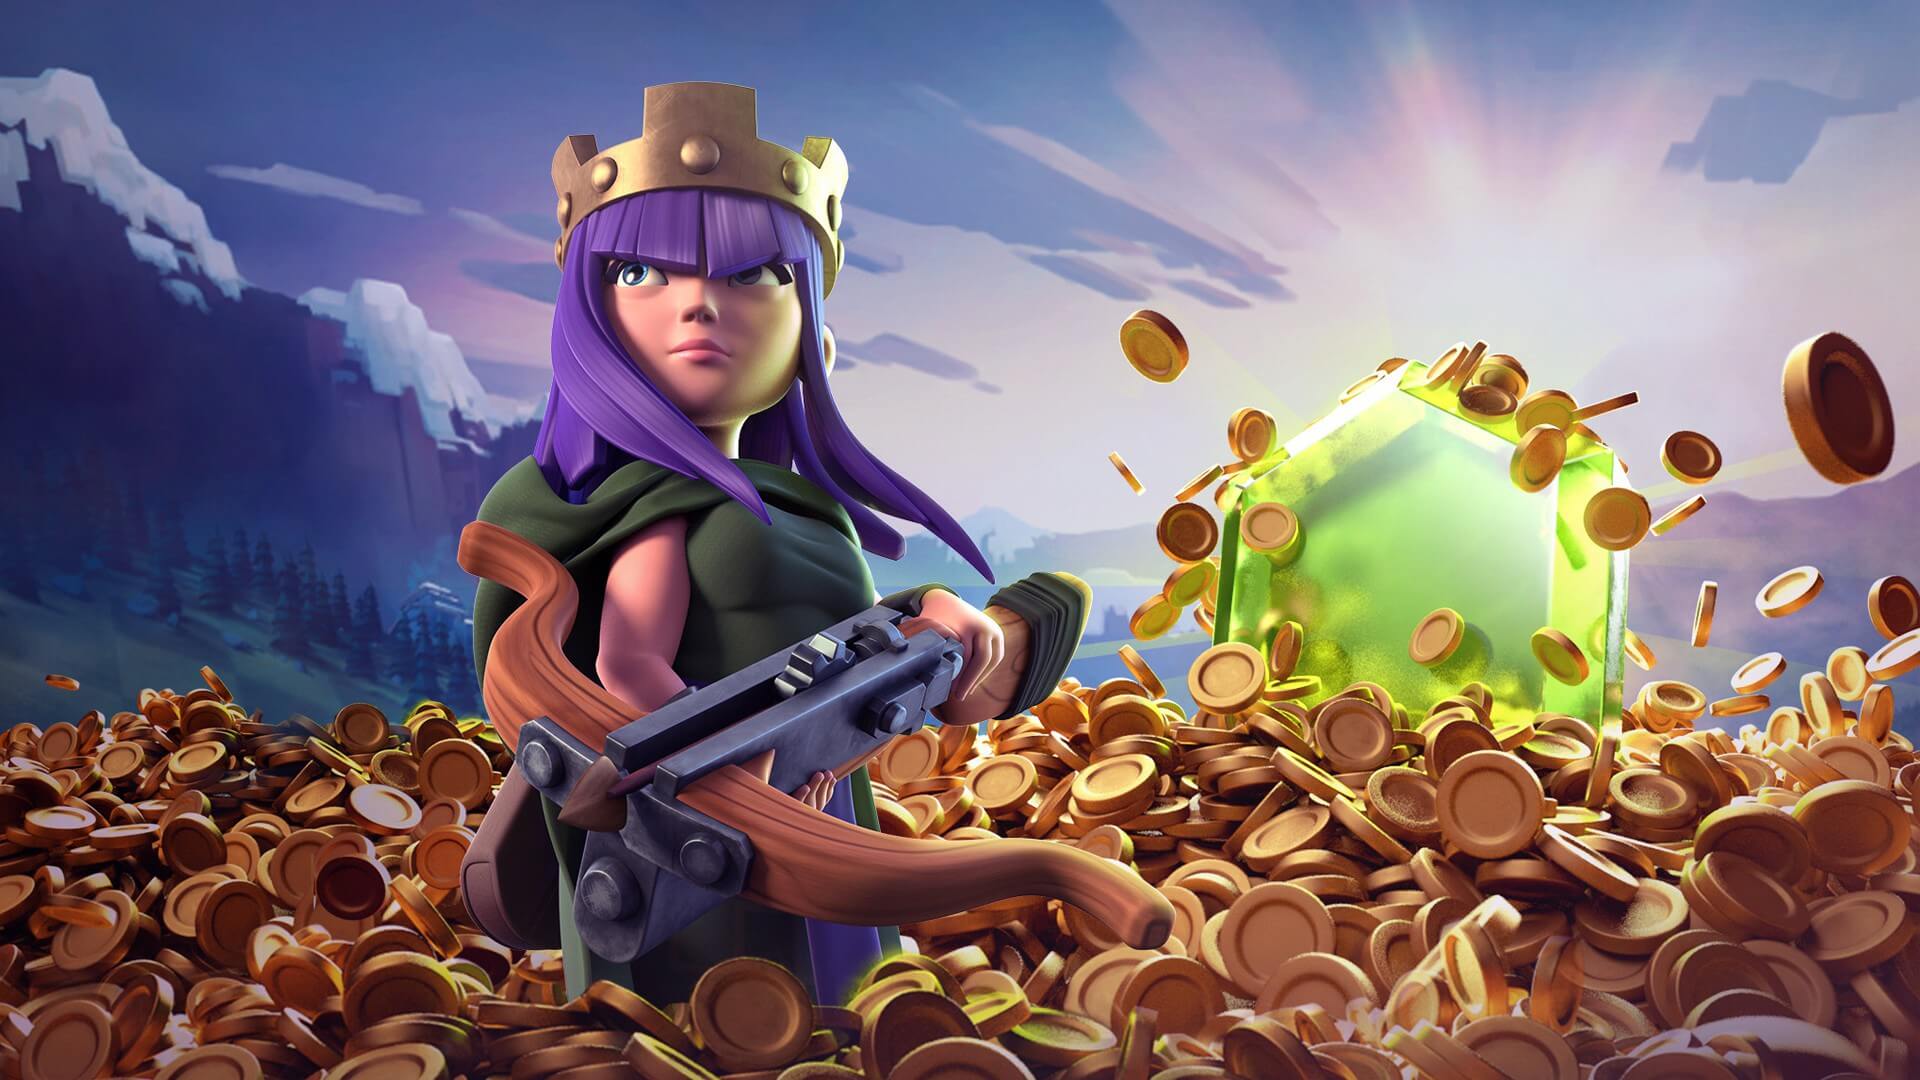 Clash Of Clans Wallpaper and Photo 4K Full HD